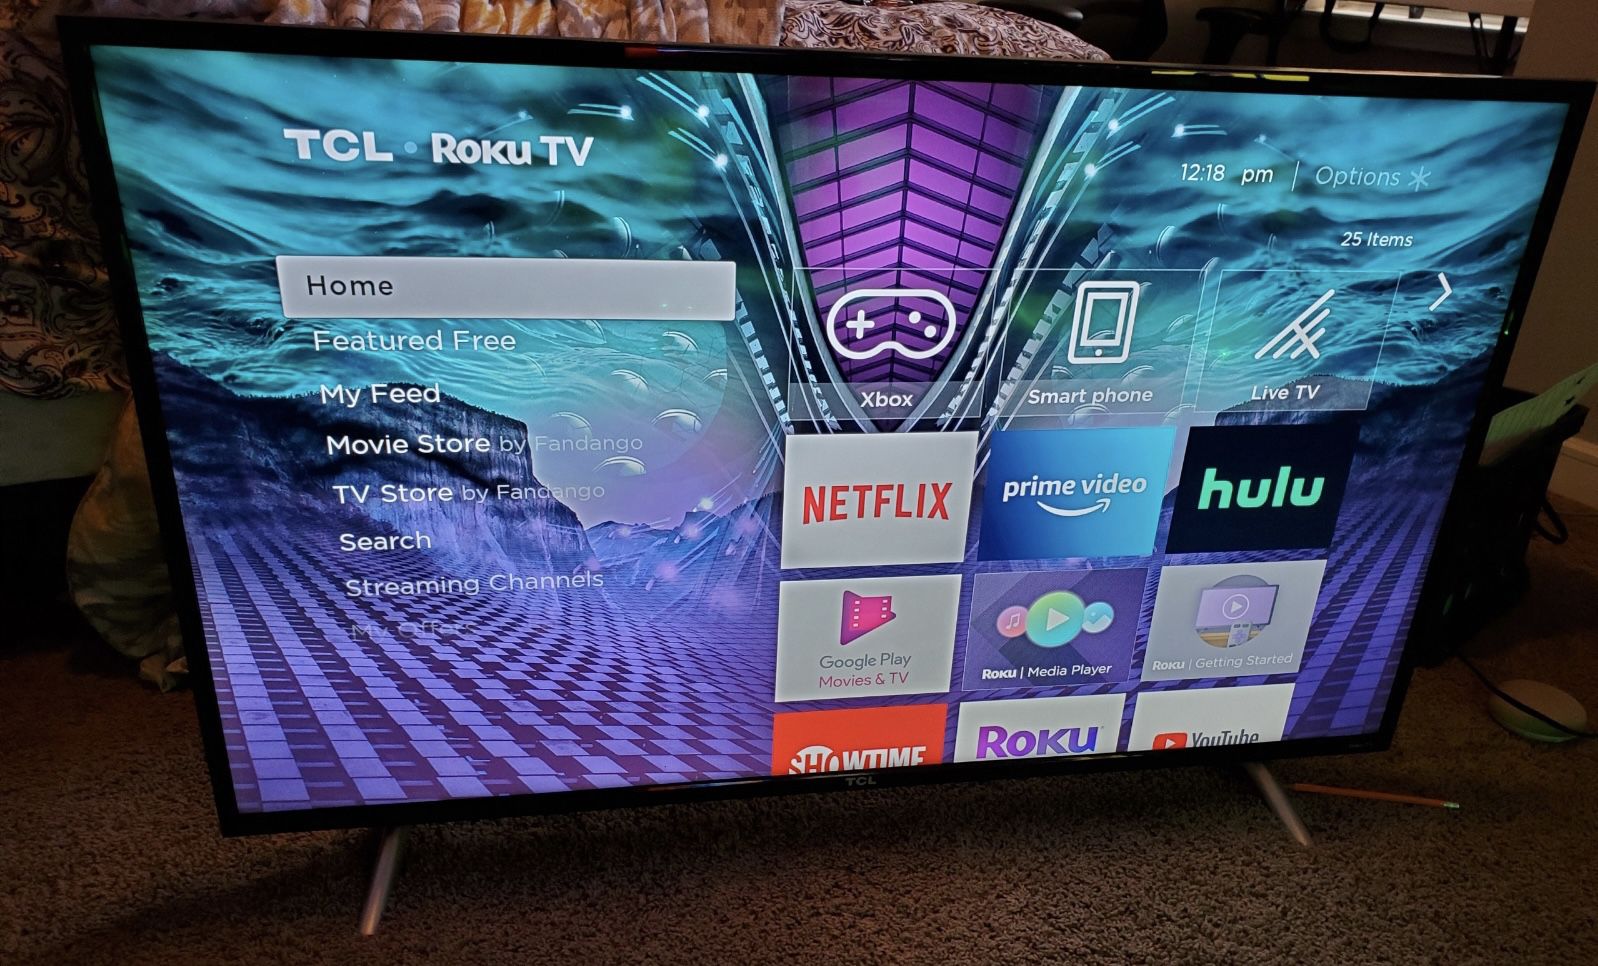 SellinTCL 50" Class 4K UHD LED Roku Smart TV 4 Series. Has Resolution 4K and 3 HDMI inputs. Pick up is off Ohio and Preston in Frisco TX near